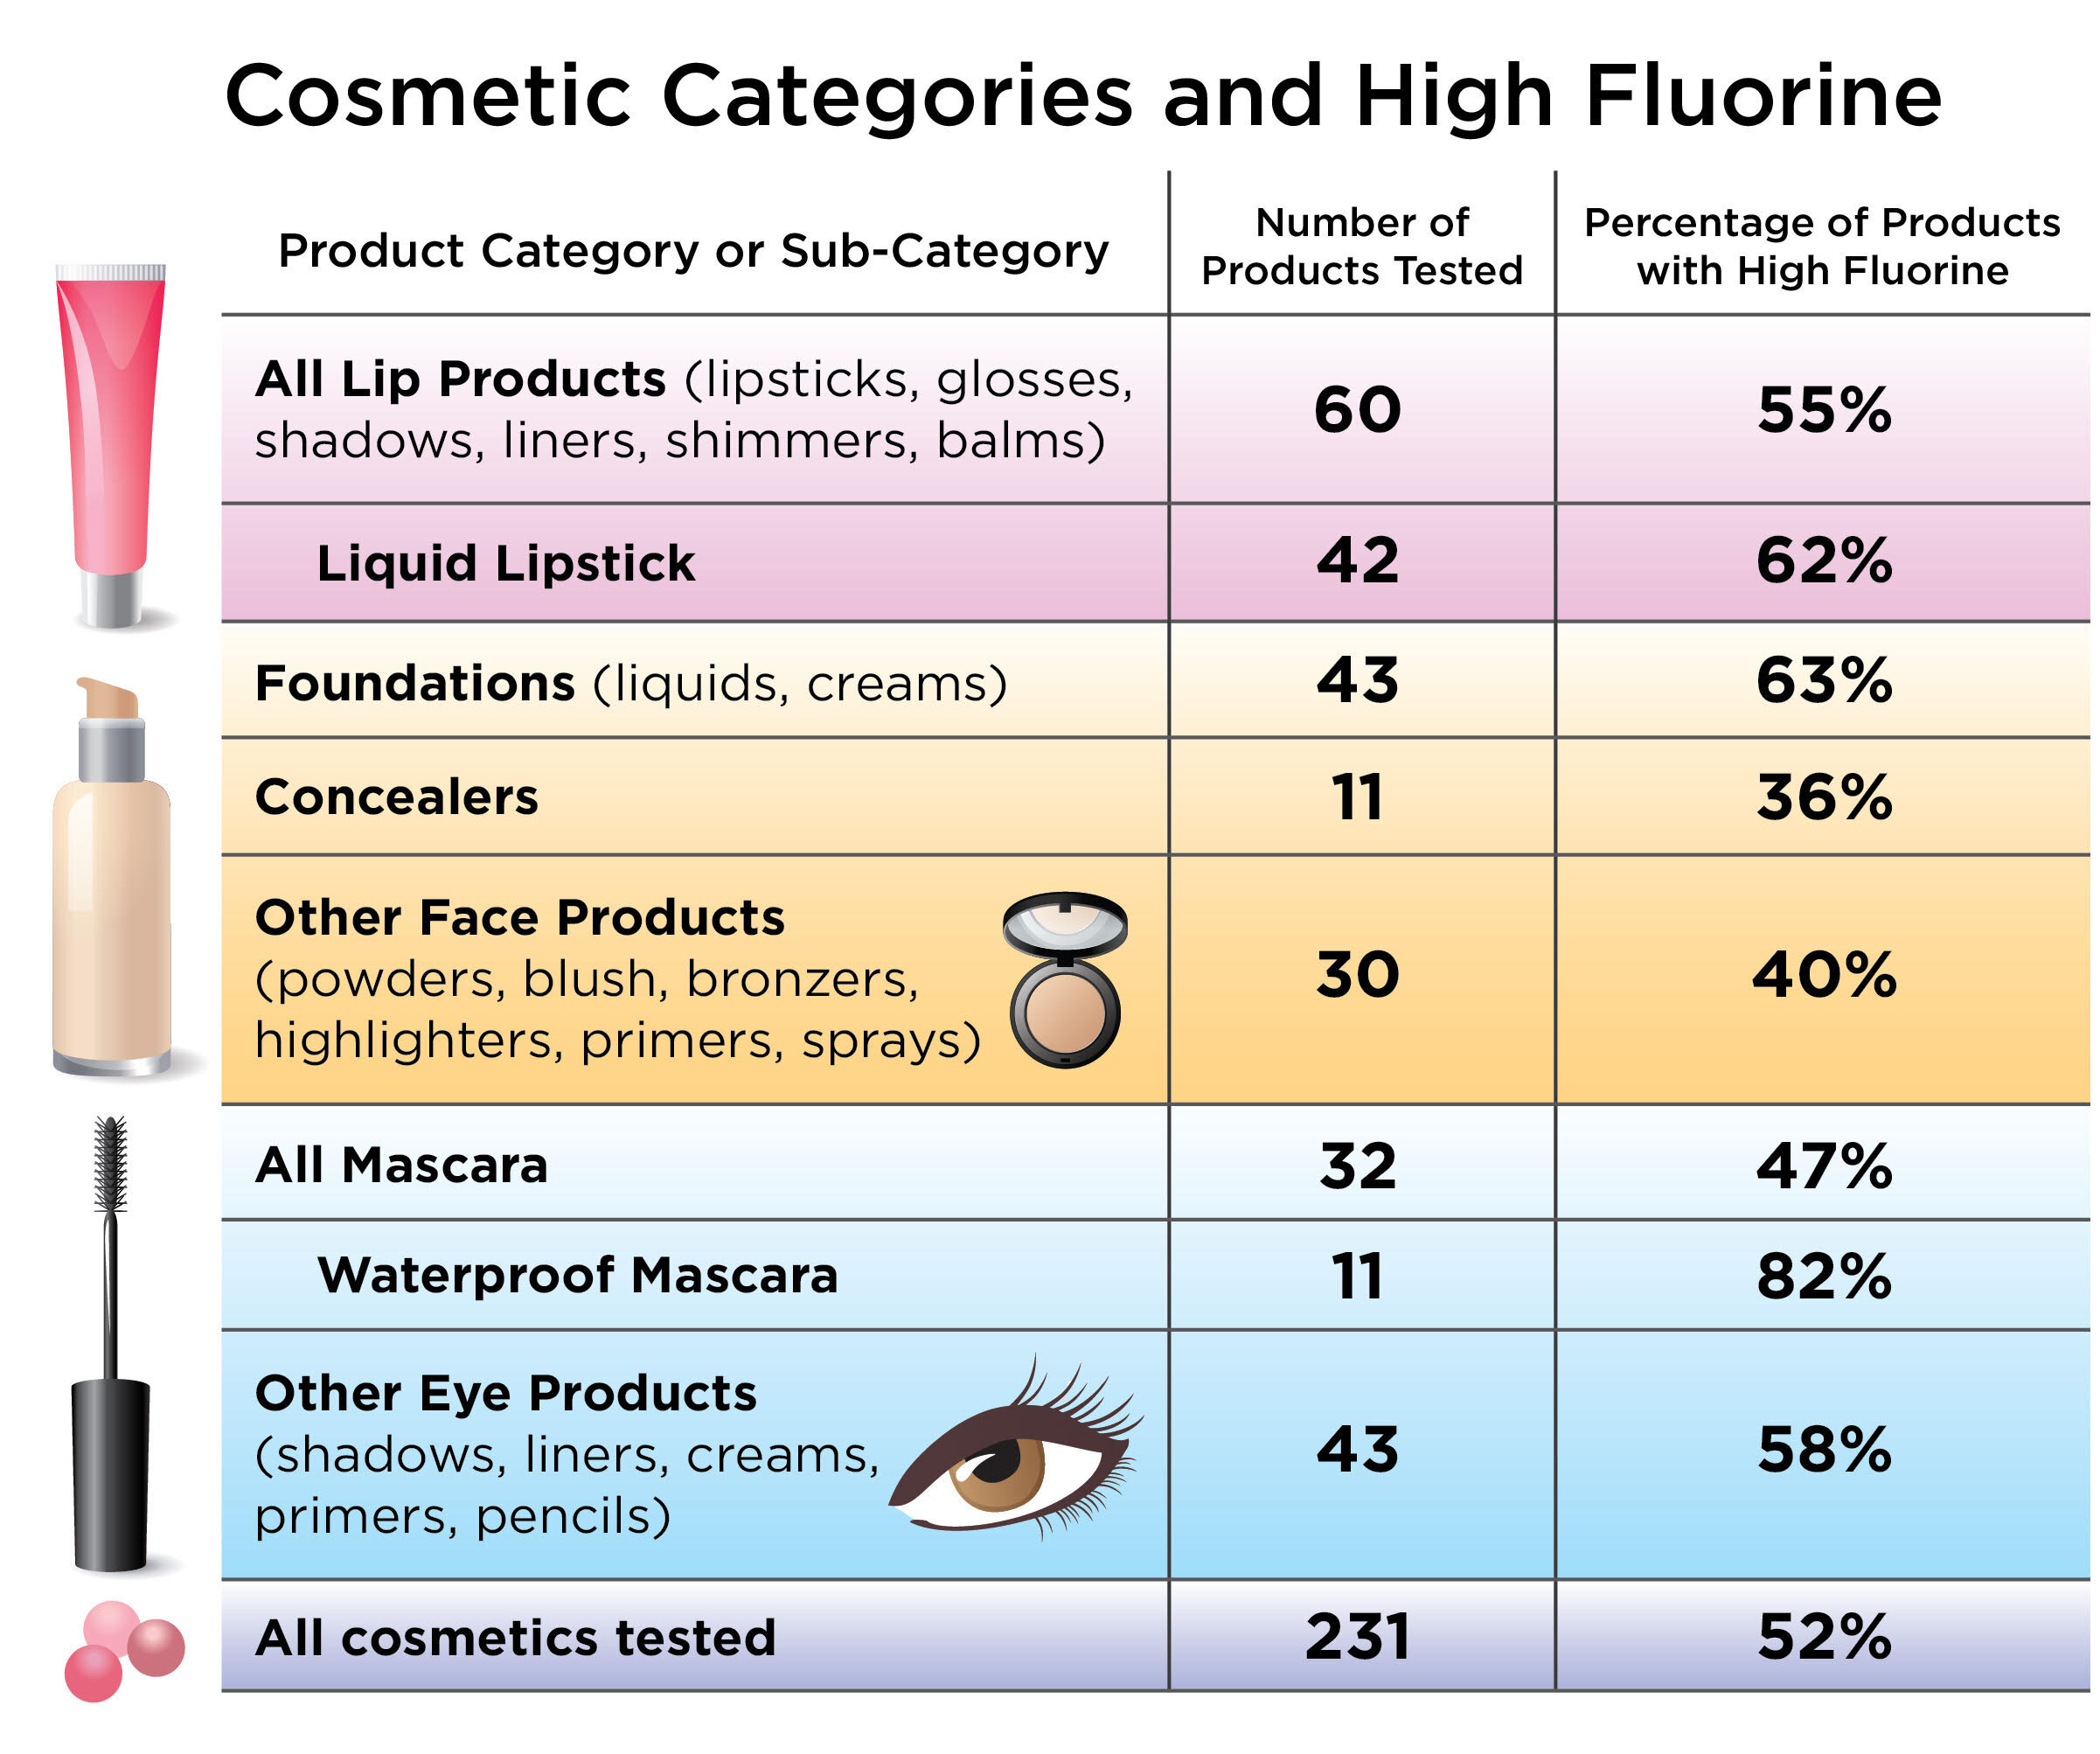 Unlabeled PFAS chemicals detected in makeup